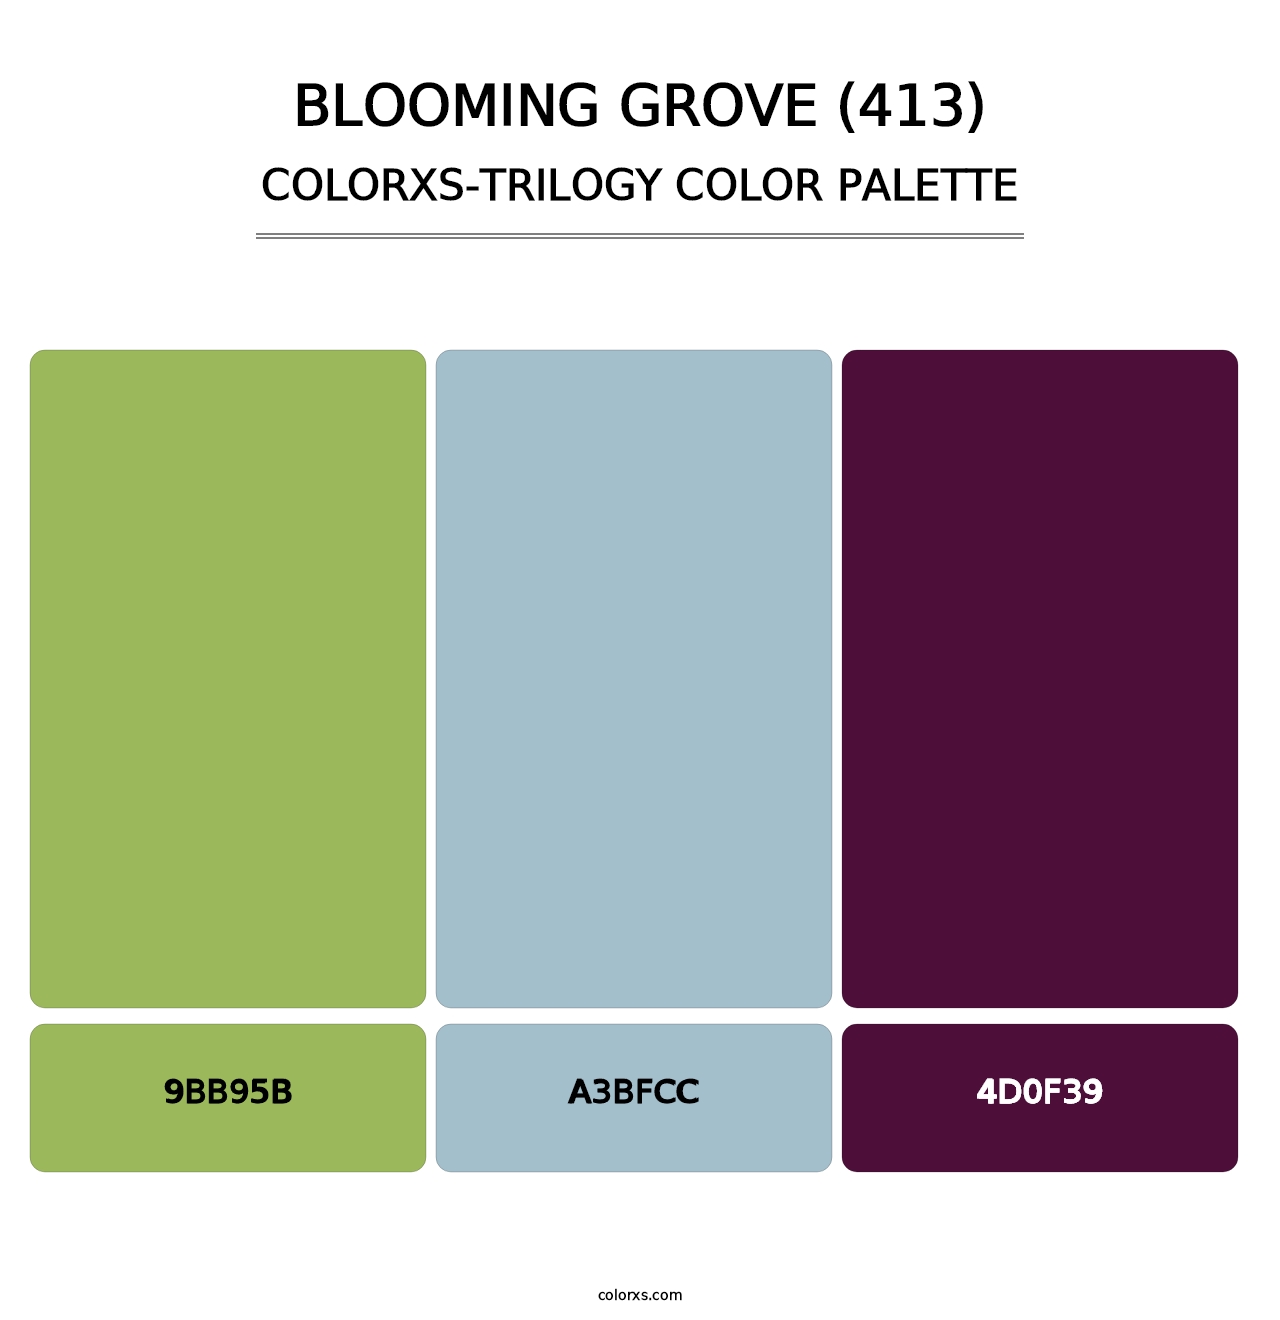 Blooming Grove (413) - Colorxs Trilogy Palette